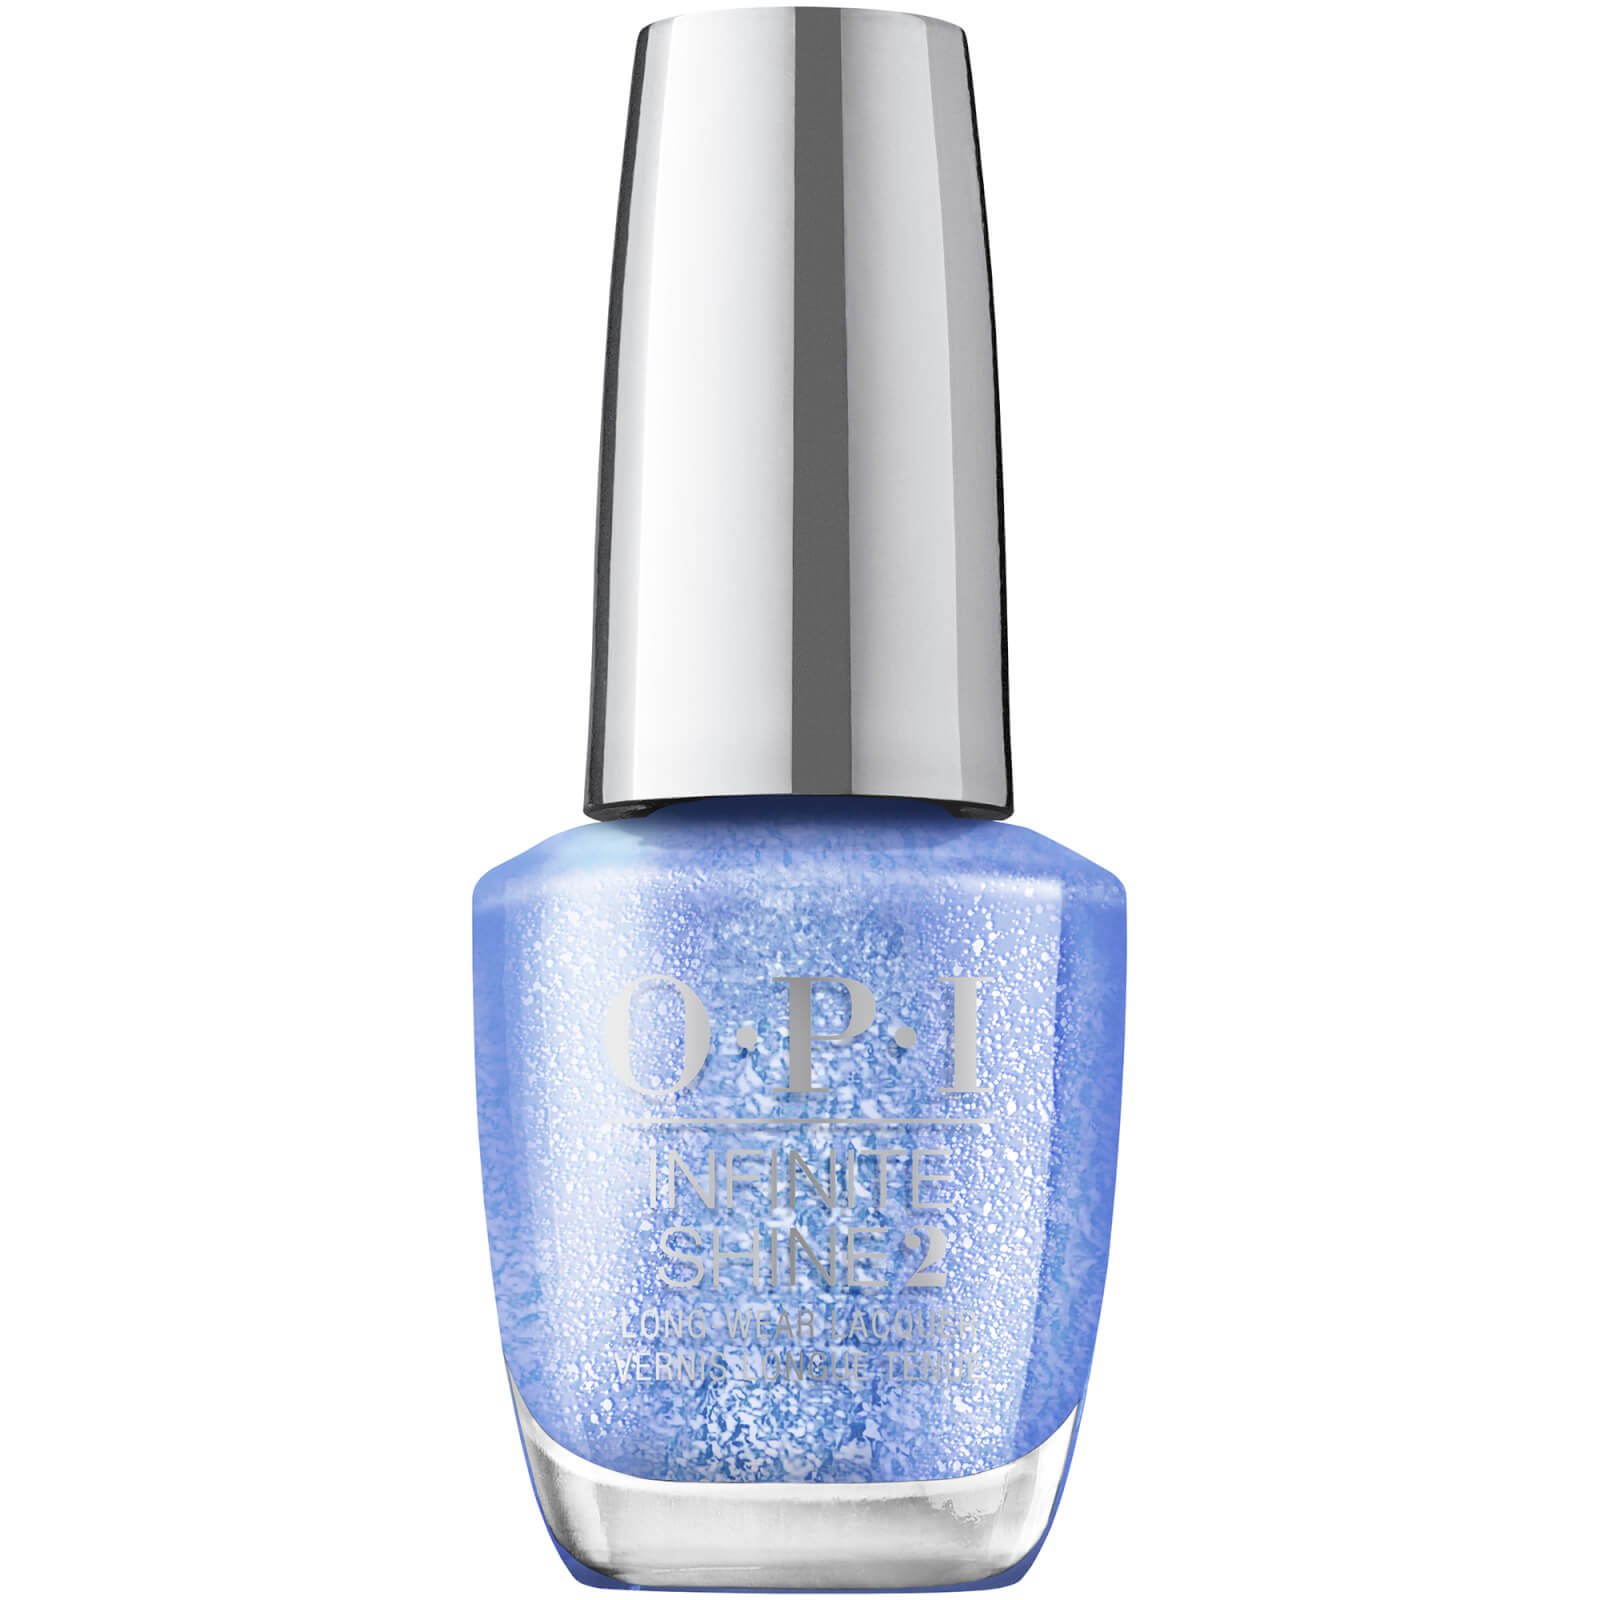 Opi Jewel Be Bold Collection Infinite Shine Nail Polish 15ml (various Shades) - The Pearl Of Your Dreams